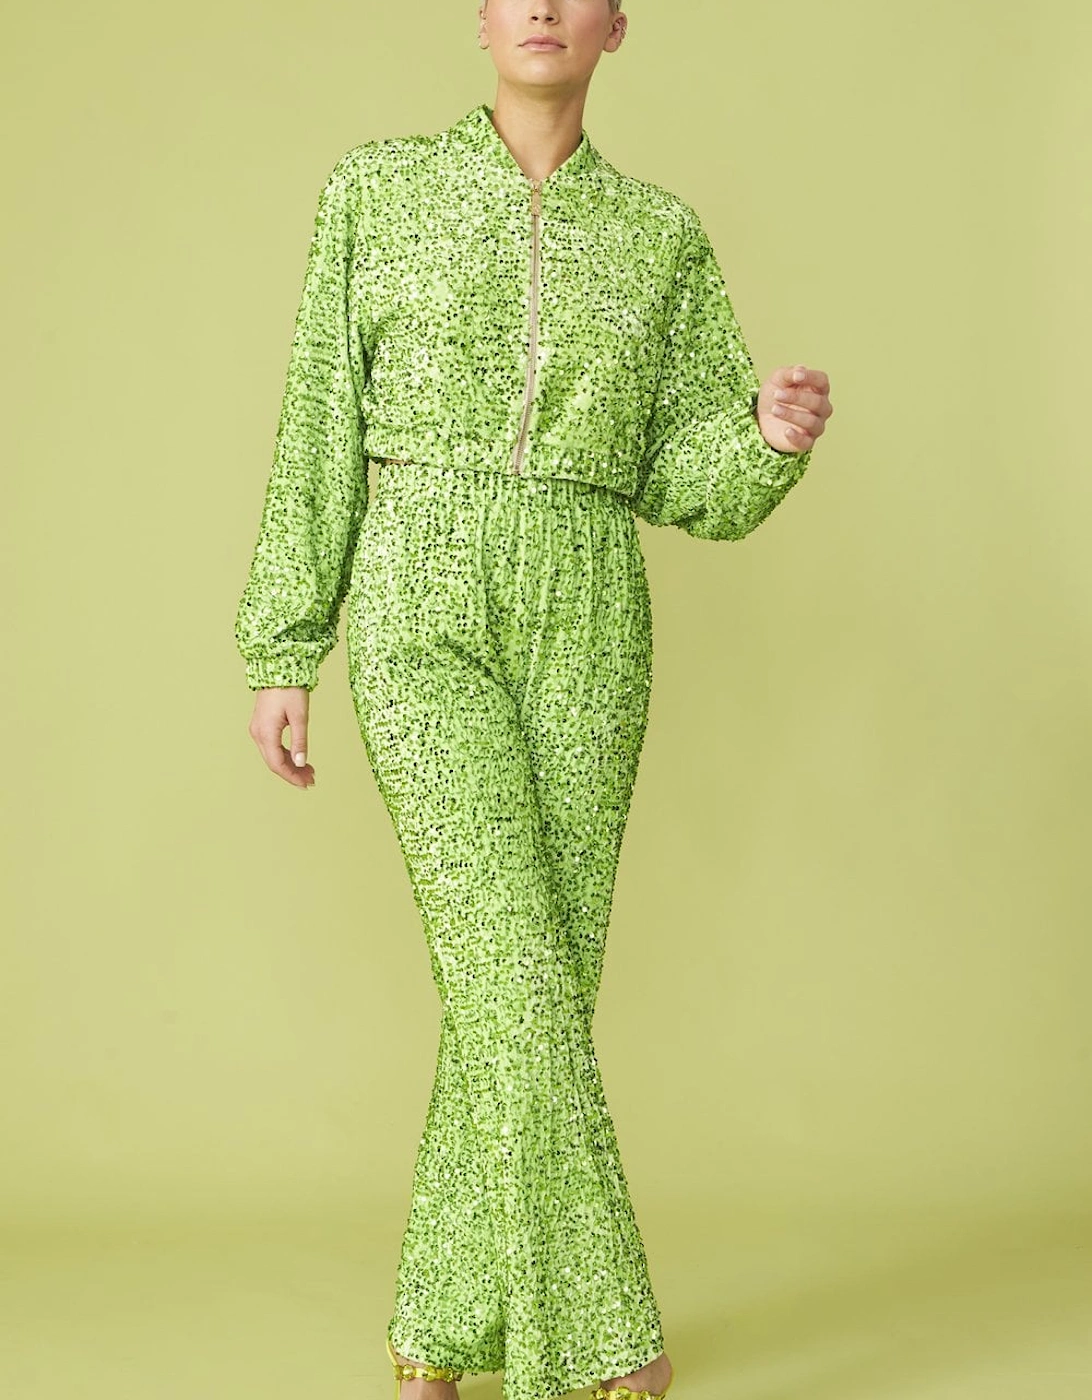 Green Sequin Trousers with Elasticated Waste